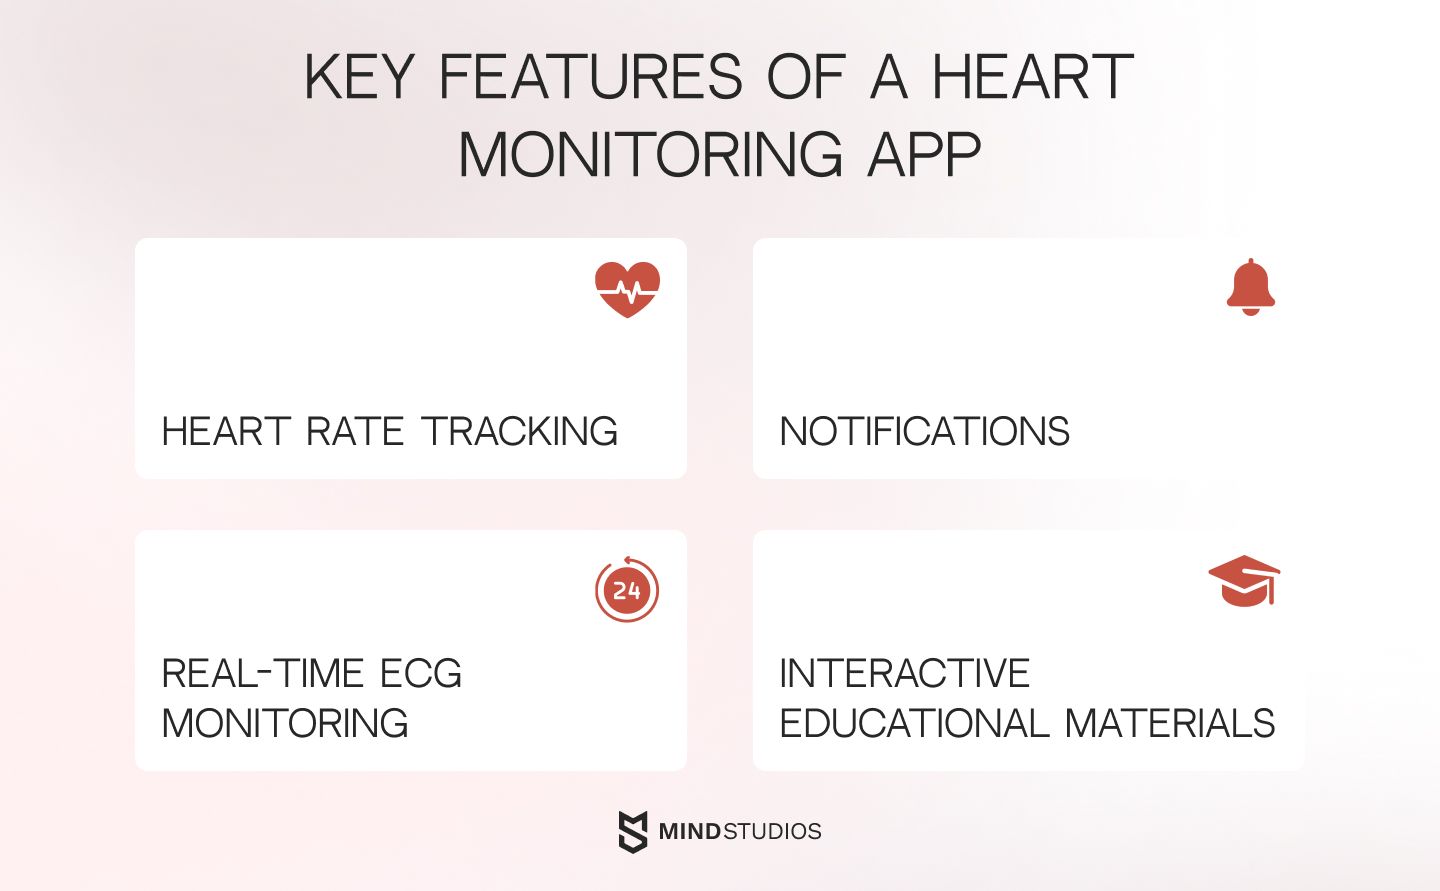 Key features of a heart monitoring app